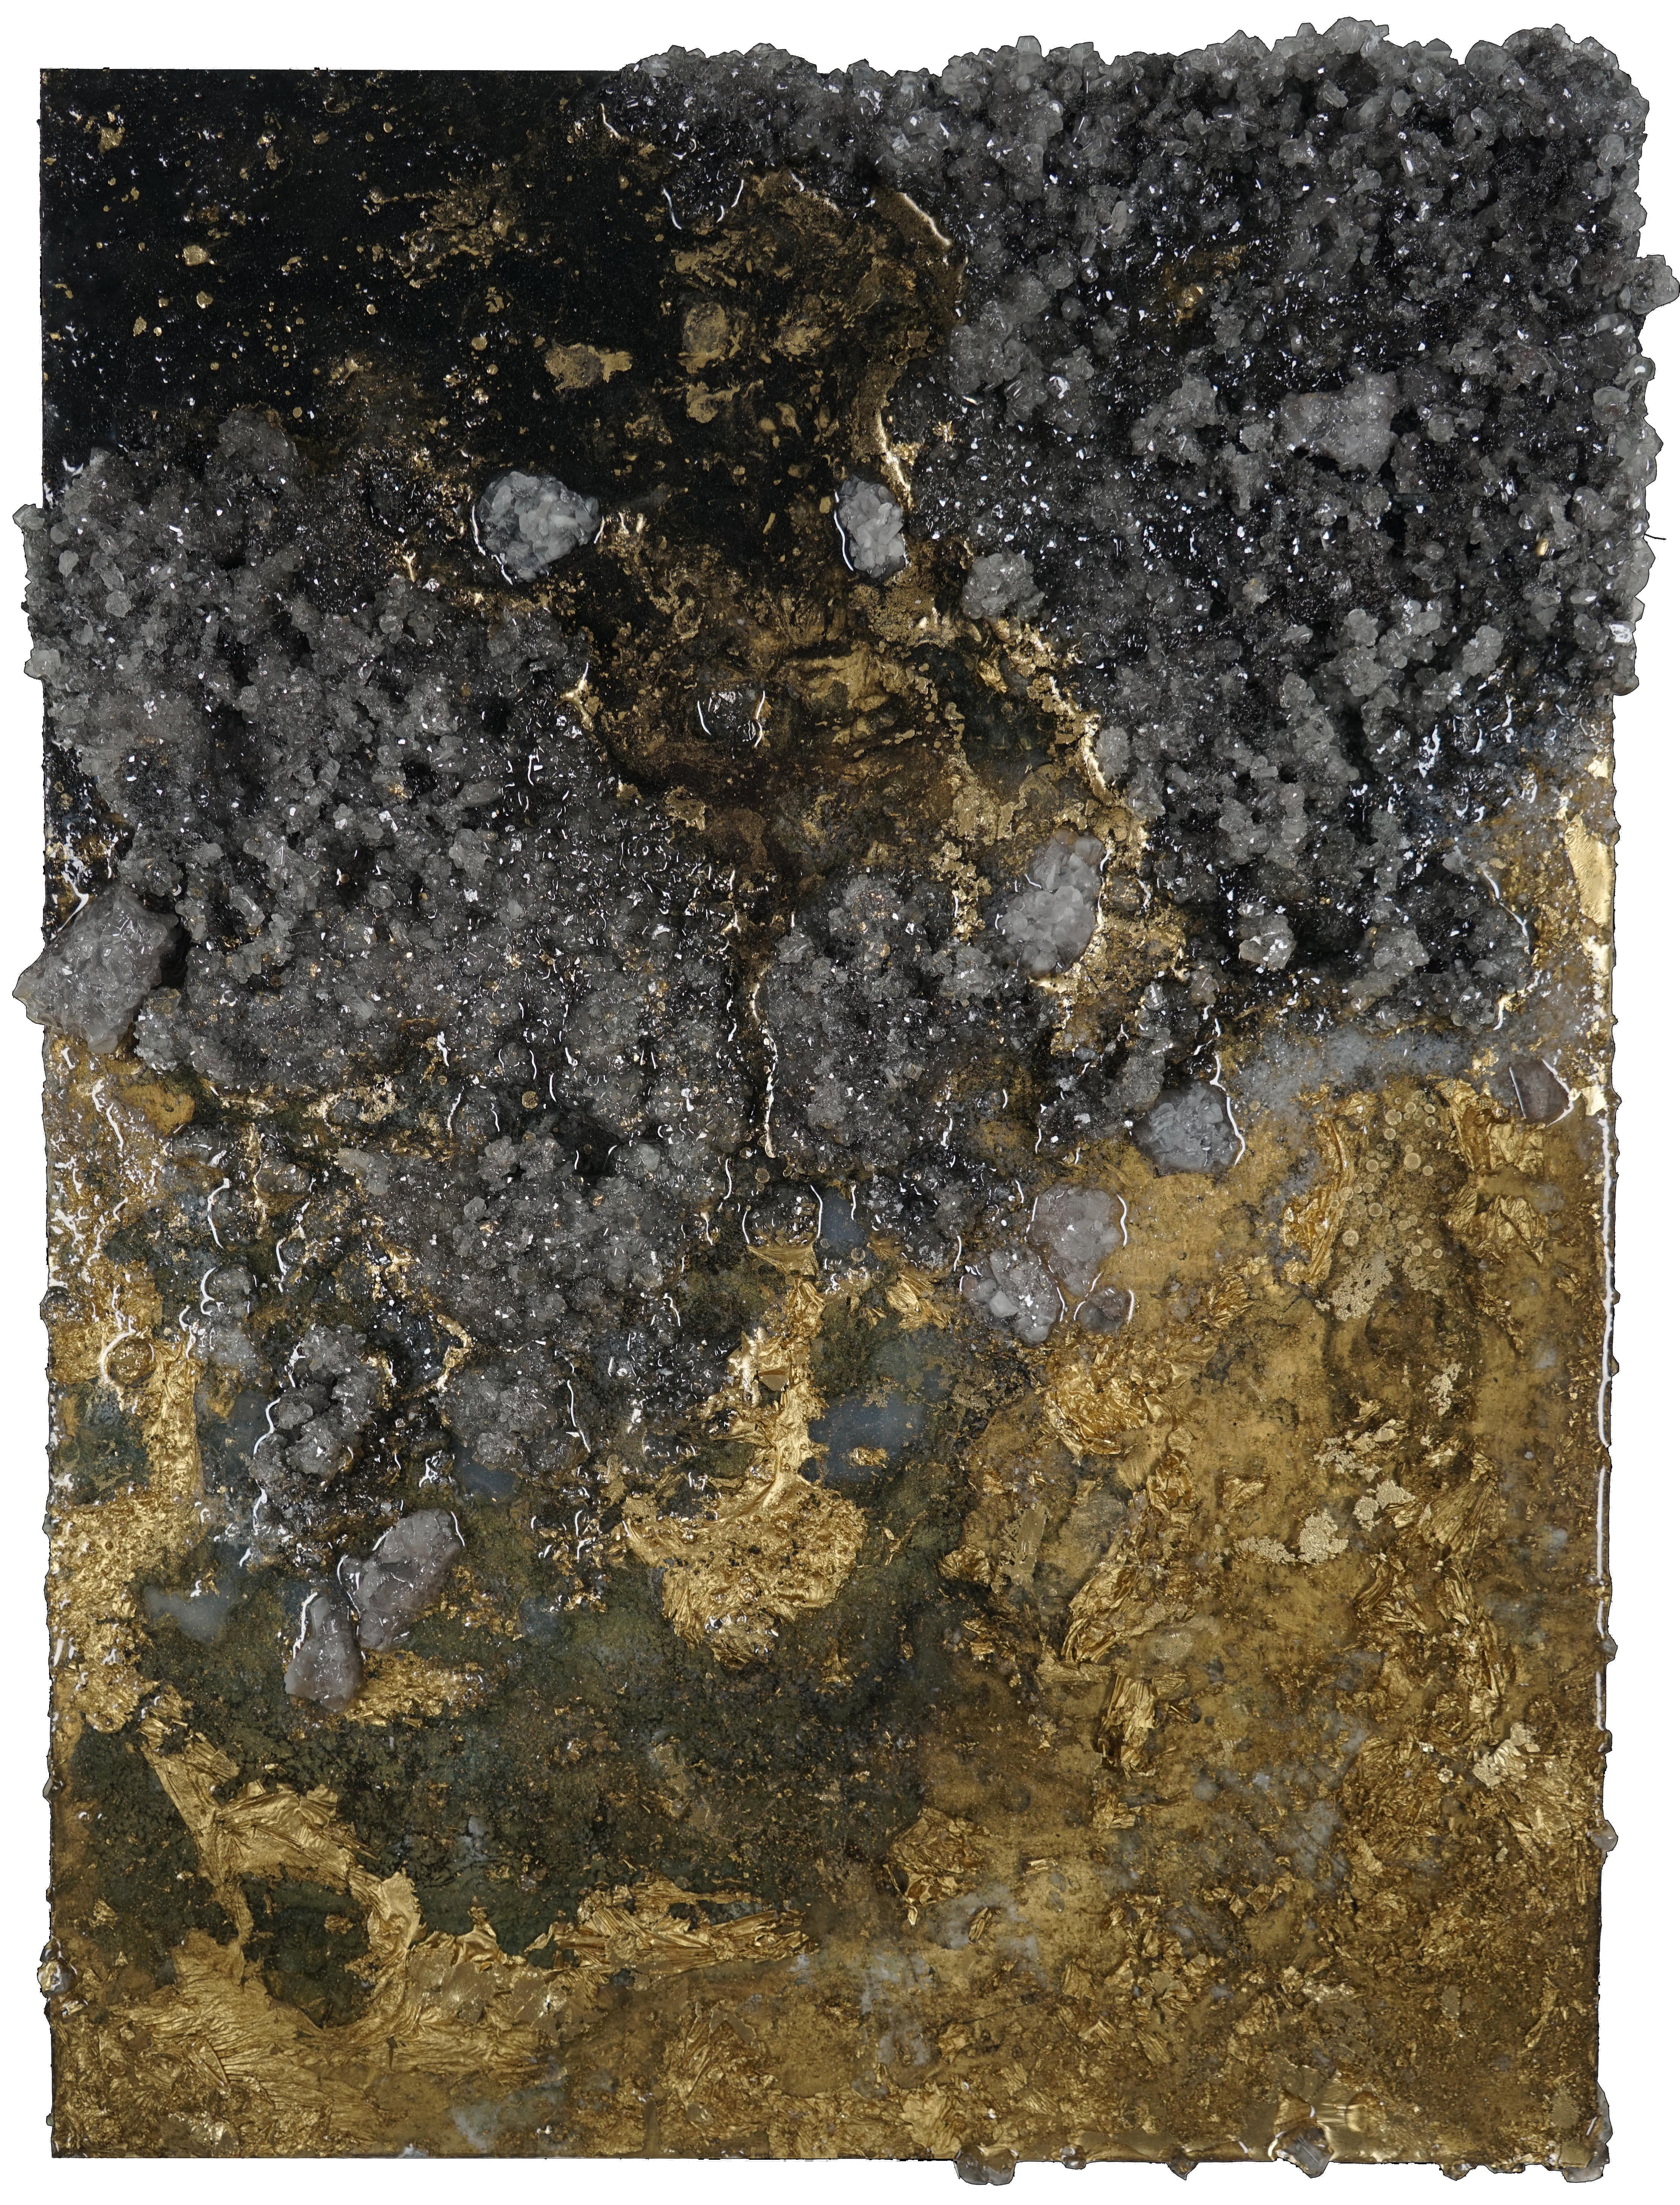 Crystal Terrain by Sarah Raskey is a 24 x 18 inch textured mixed media abstract sculptural painting on canvas. 
Heavily textured and encrusted with studio grown crystals and gold leaf. 

Sarah Raskey is a visionary artist, a licensed clinical